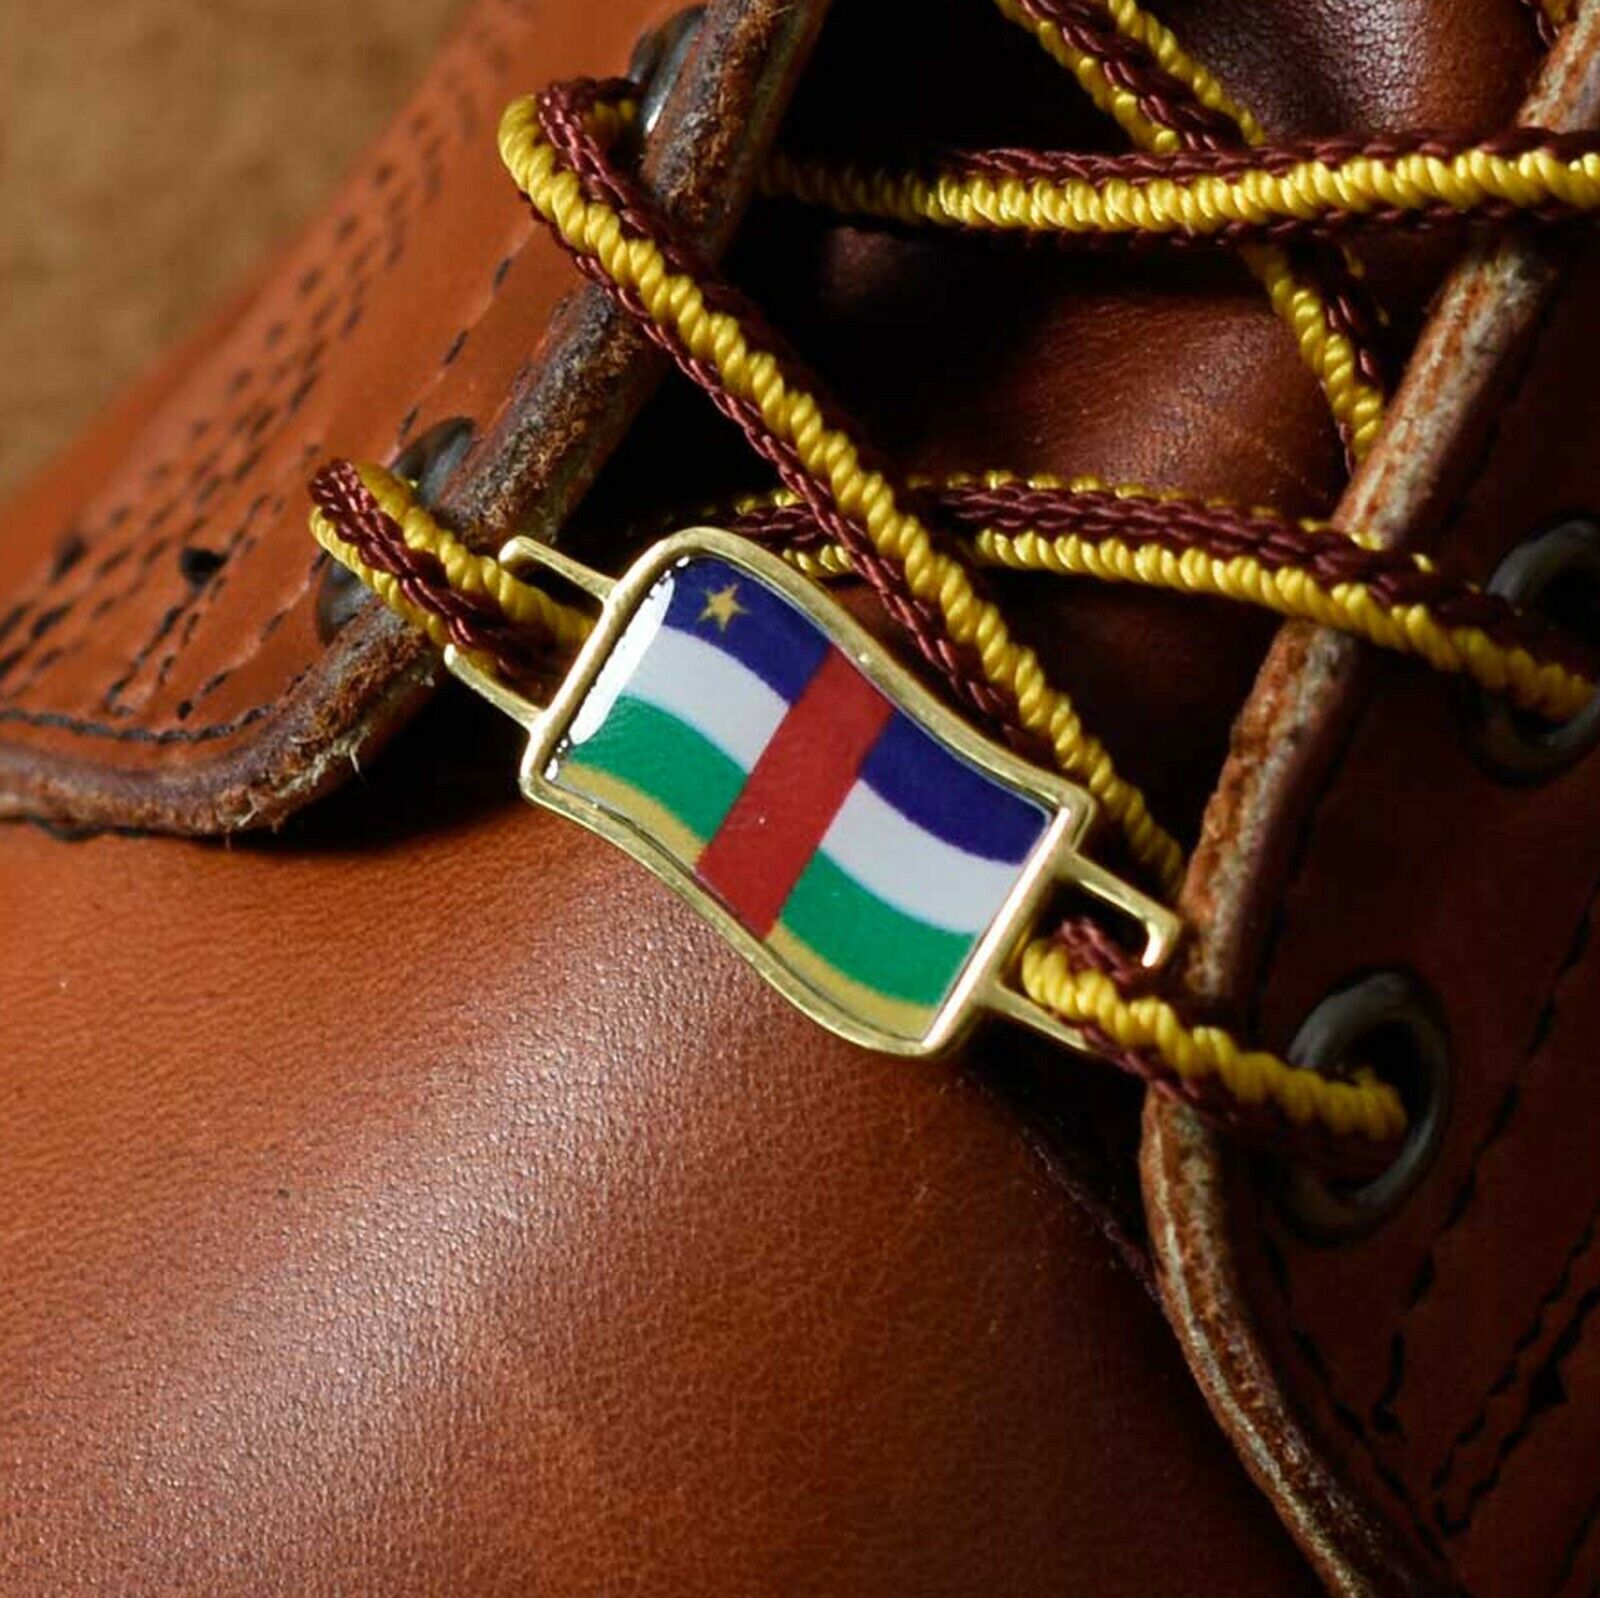 Central African Republic Flags Shoes Boot Shoelace Keeper Holder Charm BrooklynMaker